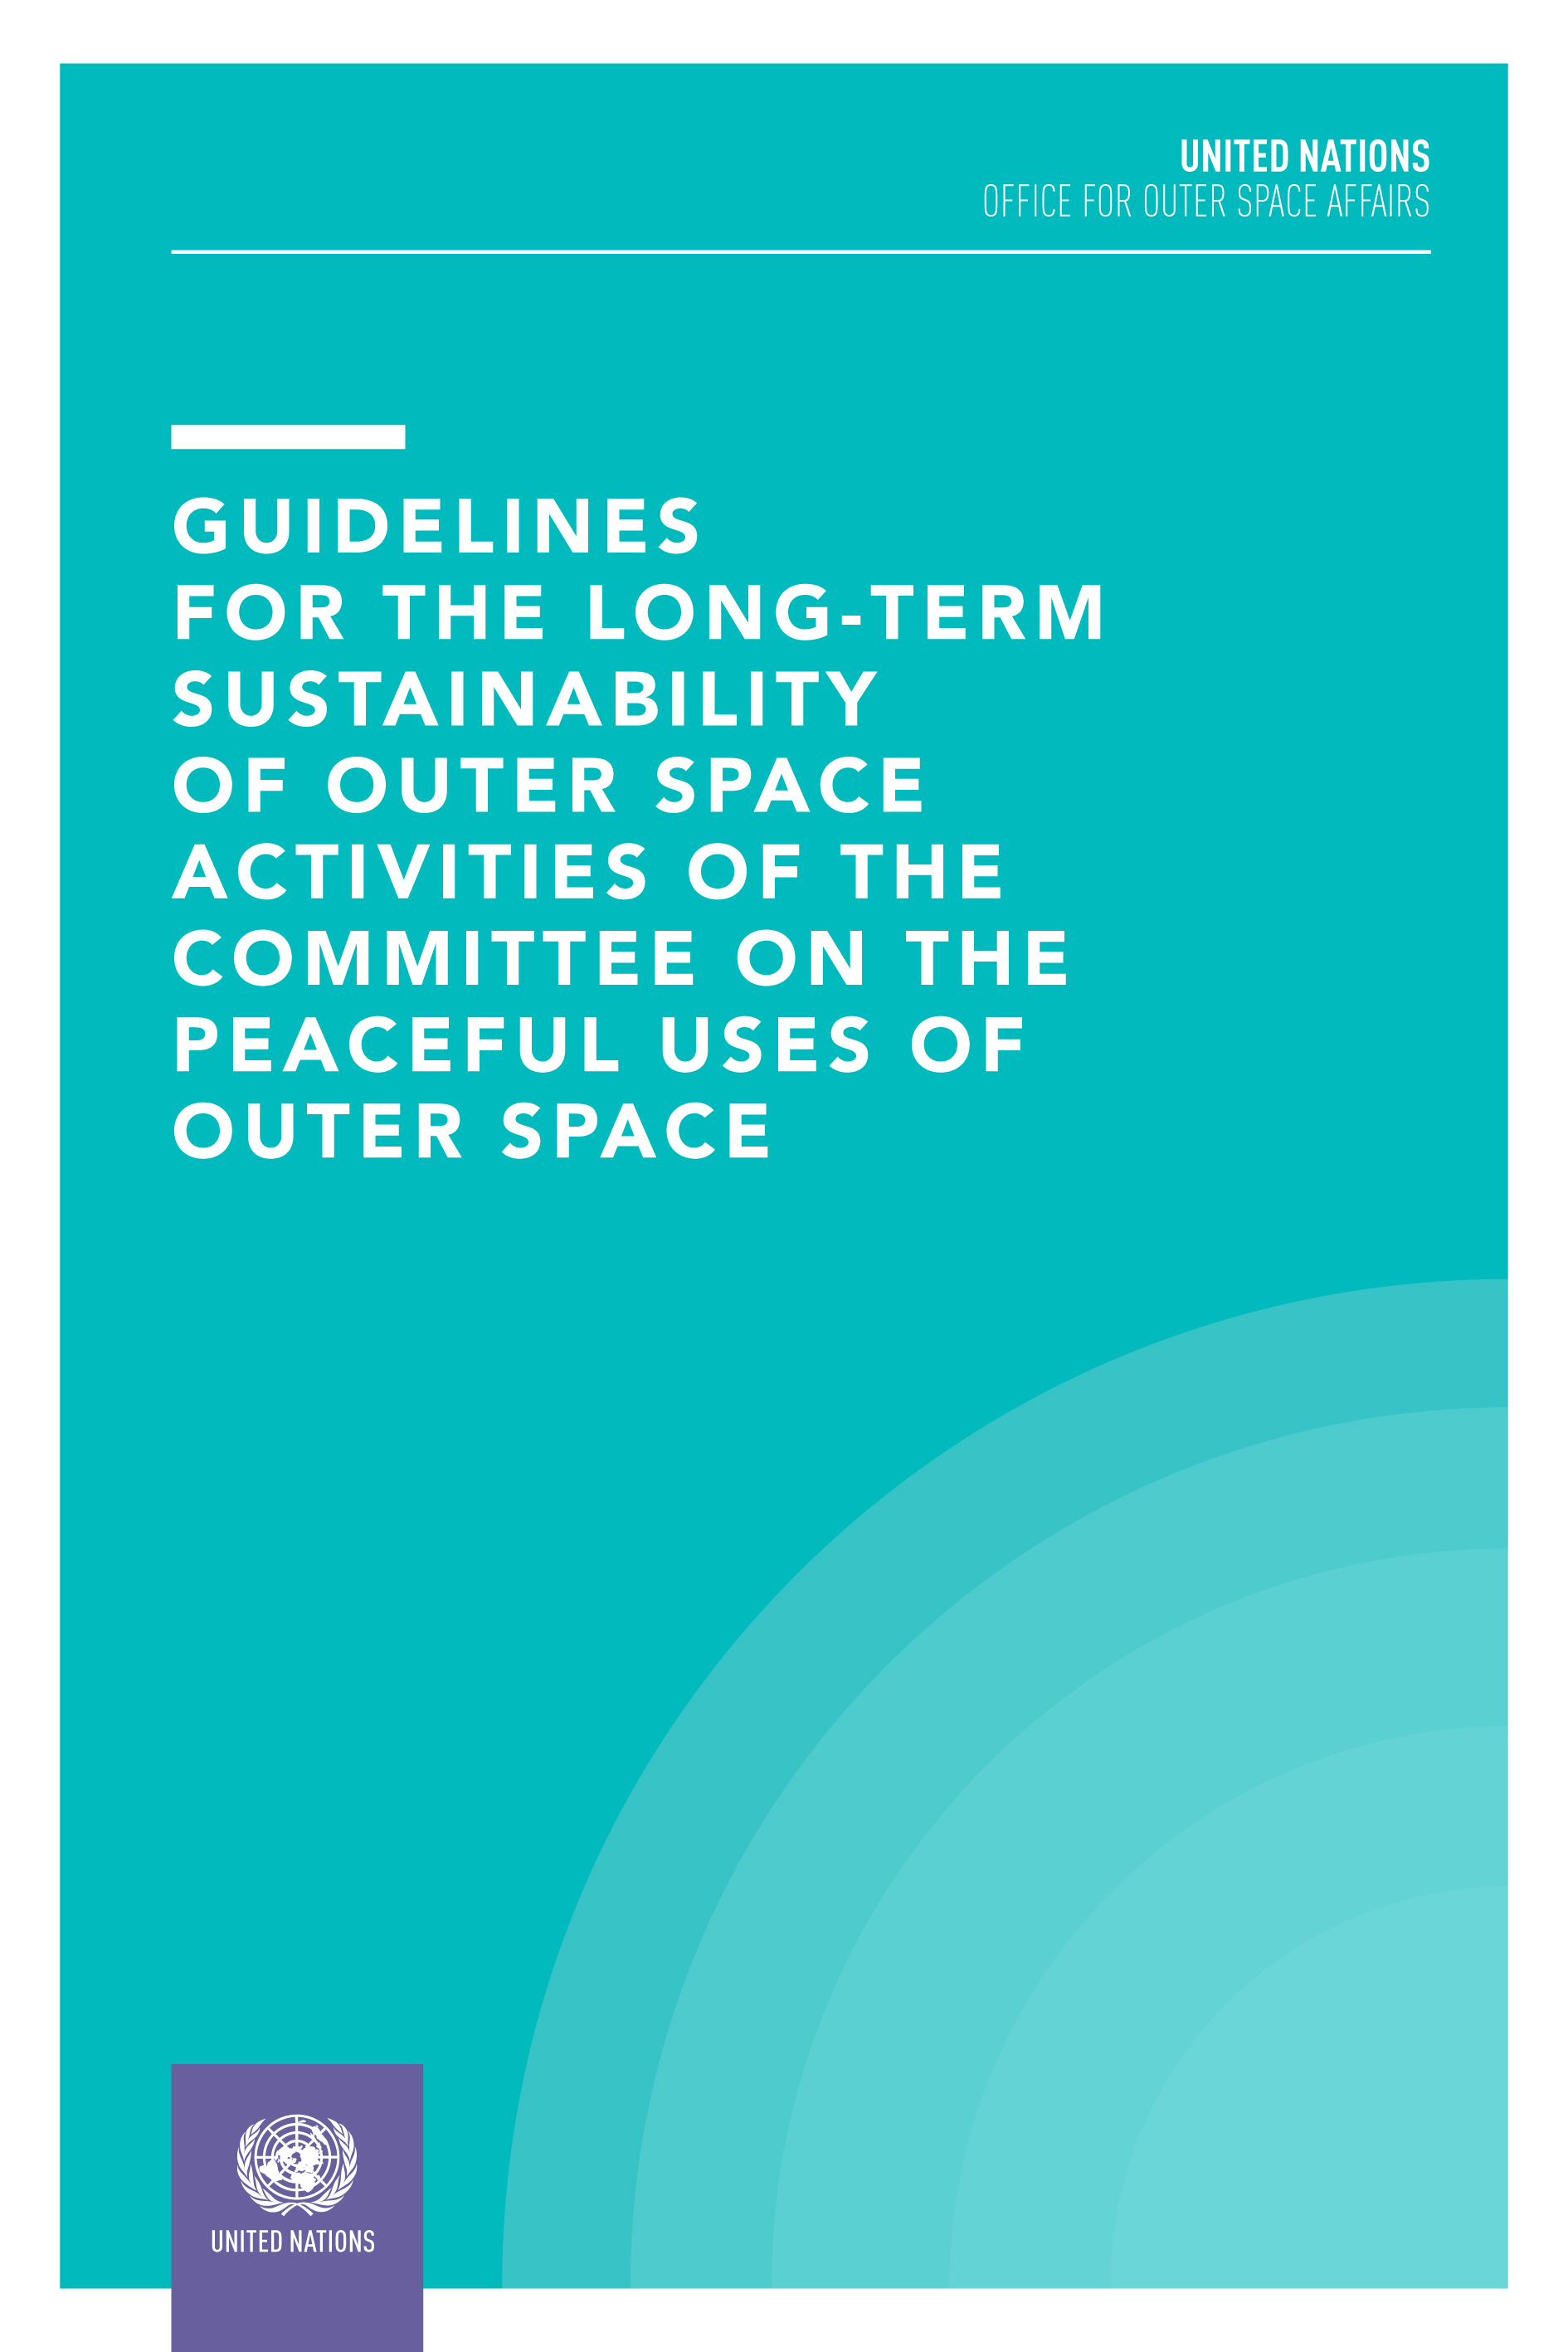 image of Guidelines for the Long-term Sustainability of Outer Space Activities of the Committee on the Peaceful Uses of Outer Space